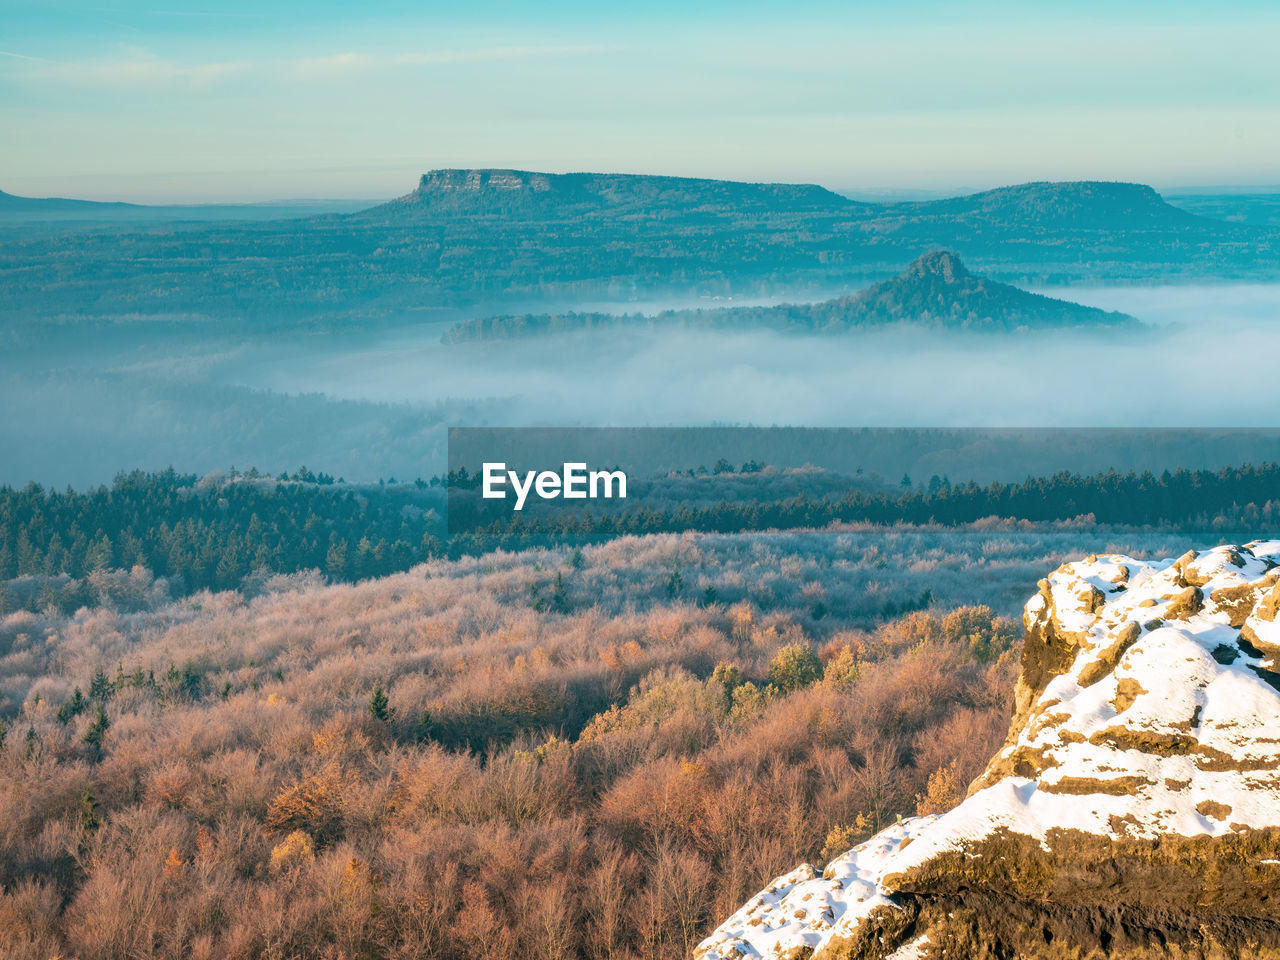 Snowy rocks above valley in saxony switzerland national park. elbe river valley in chill morning